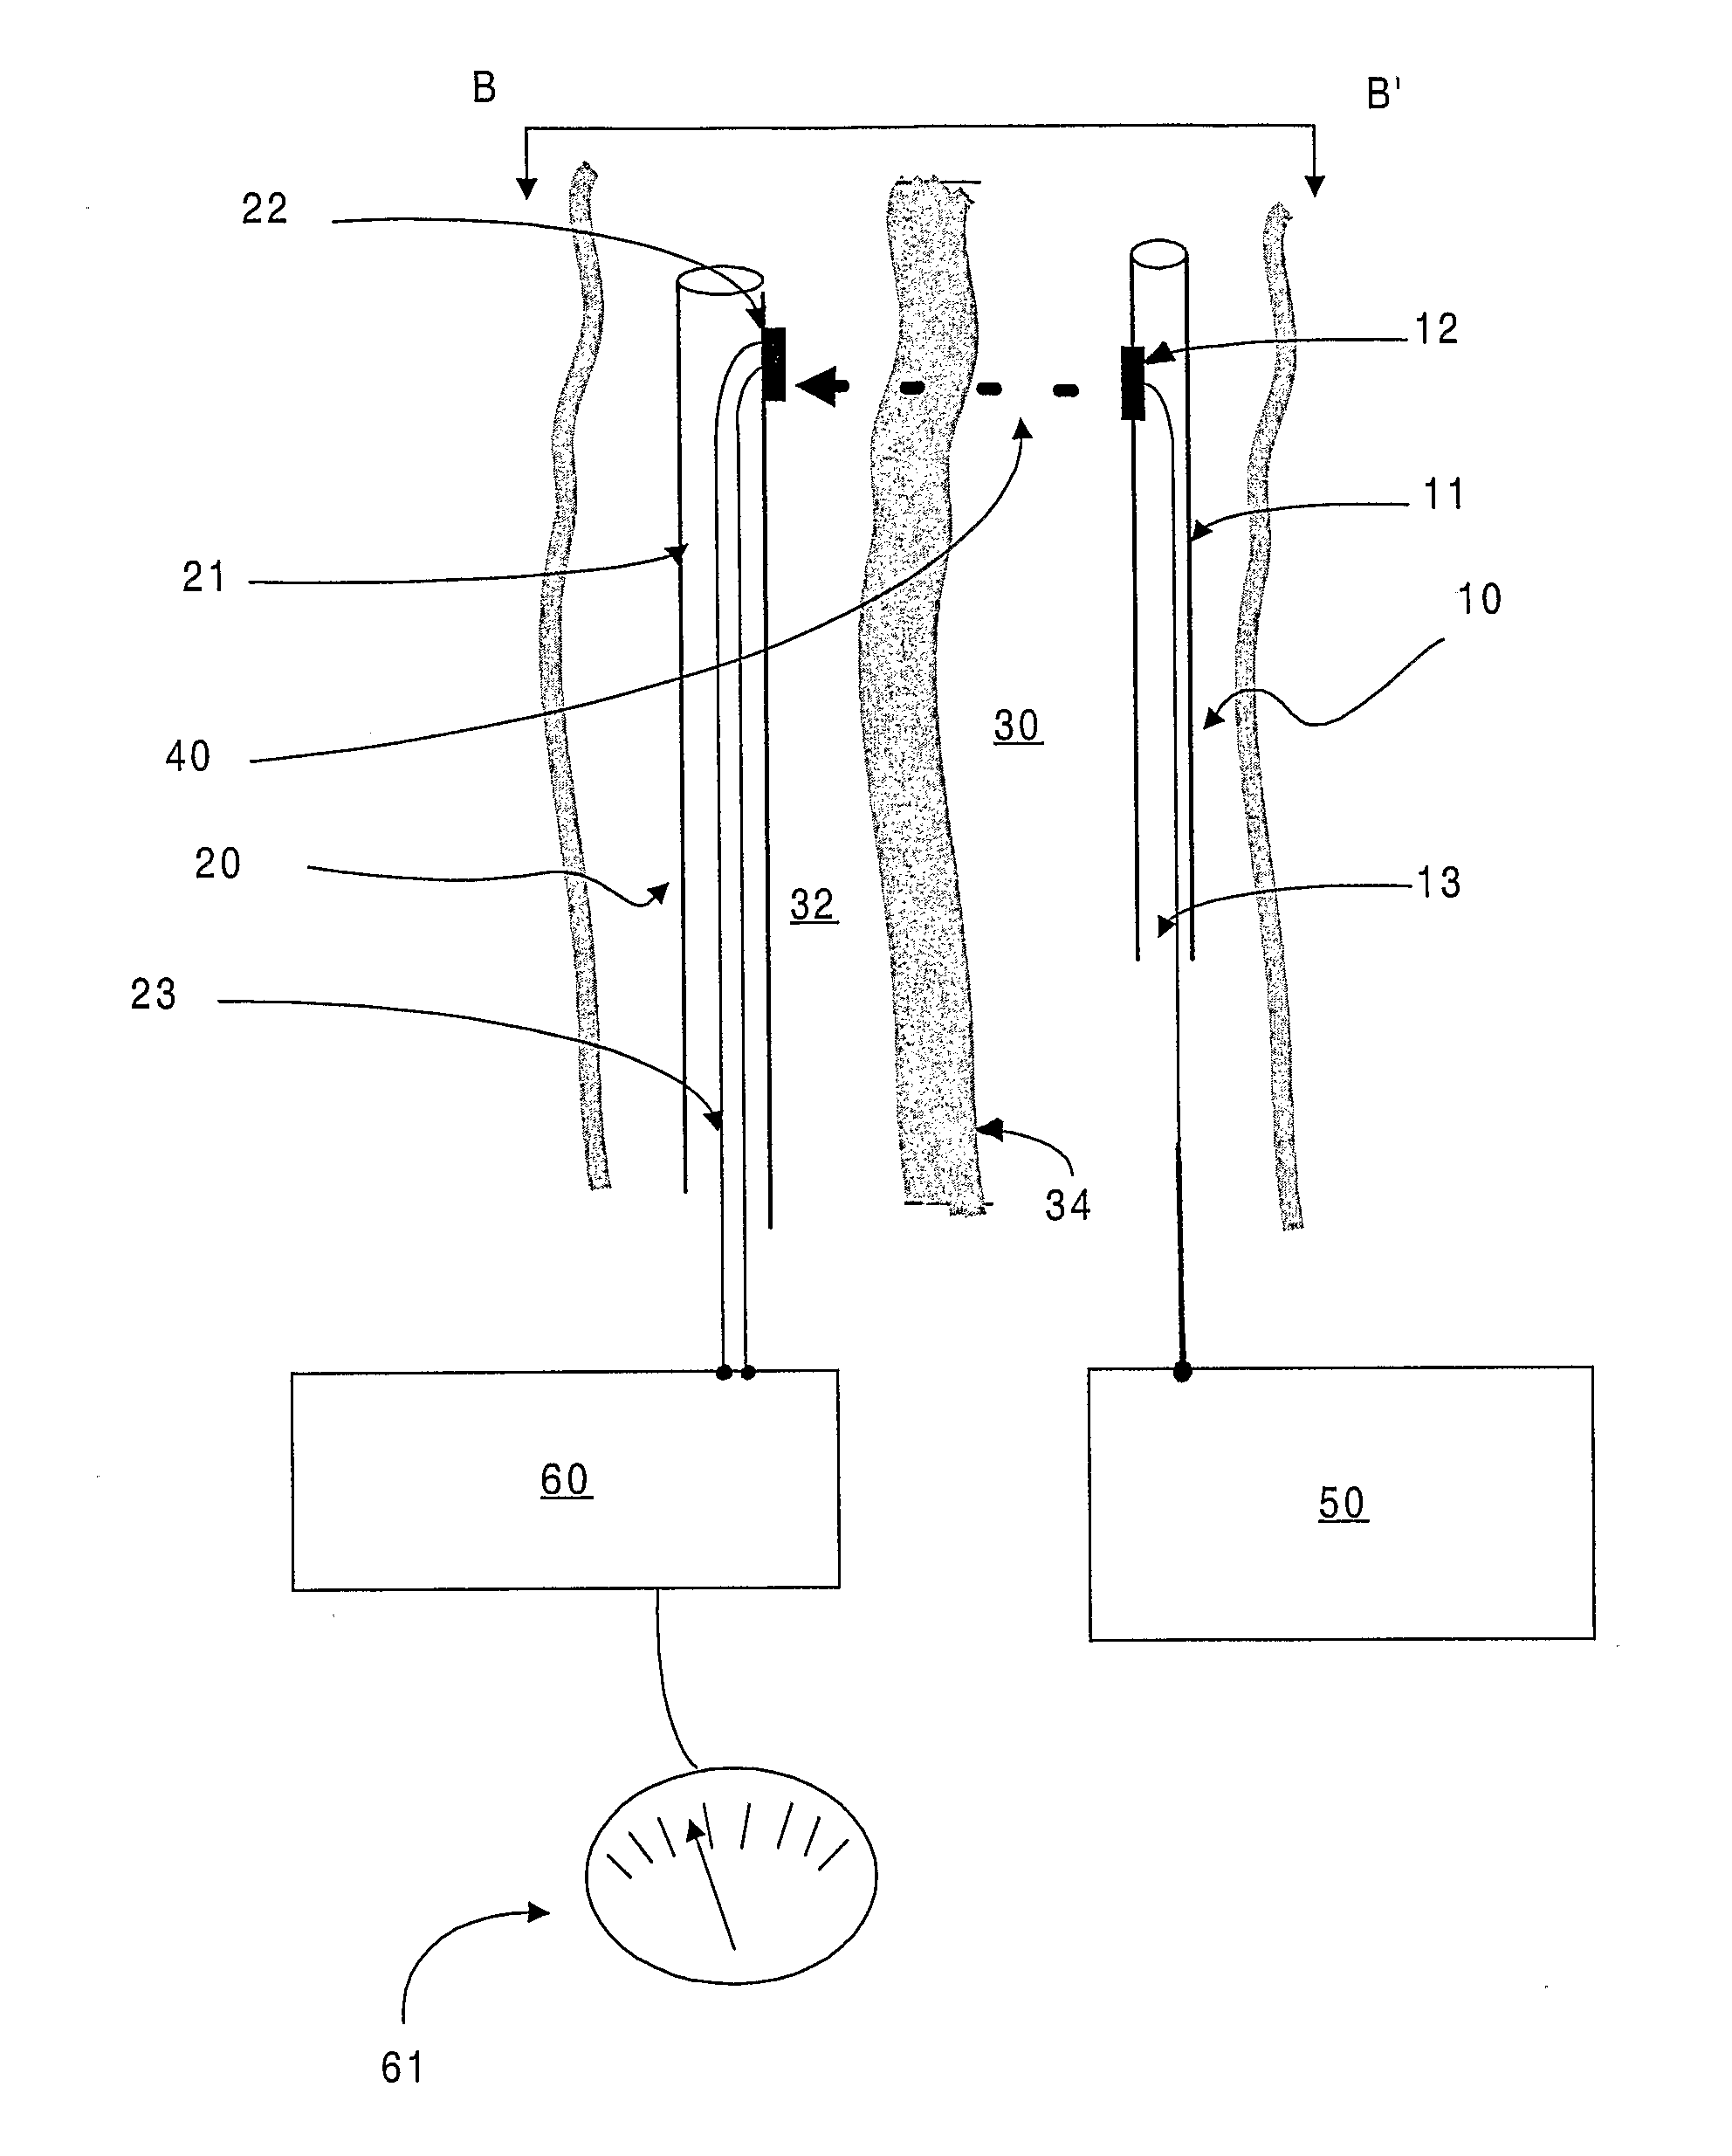 Minimally Invasive Surgical Appartus and Methods